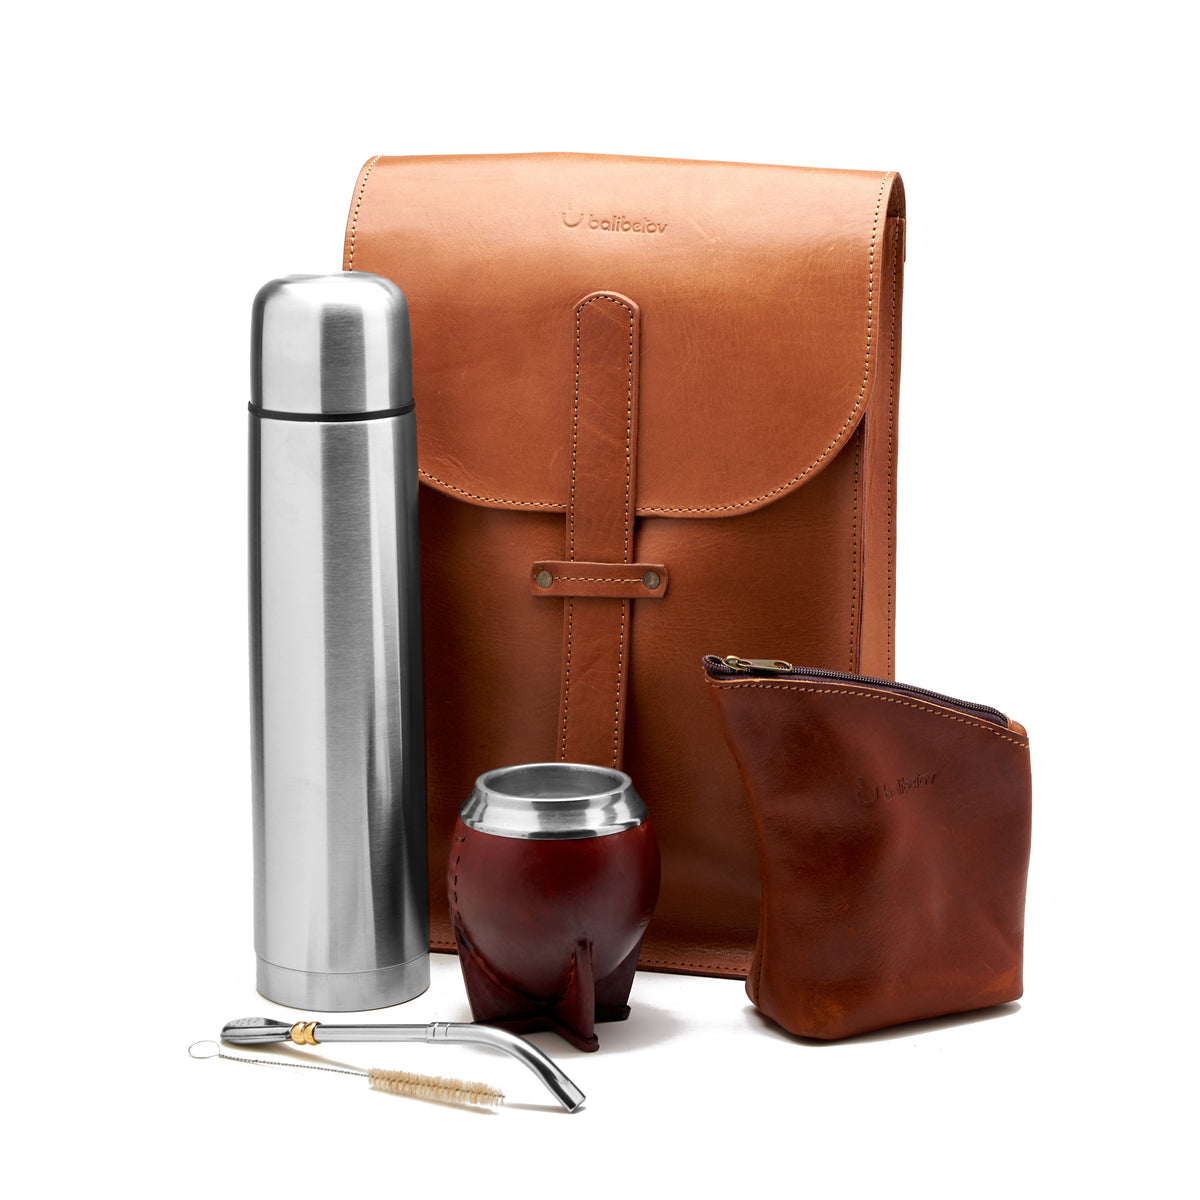 BALIBETOV Complete Yerba Mate Set - Modern Mate Gourd, Thermos, Yerba  Container, Bombilla and Cleaning Brush Included - All Premium Quality 304  18/8